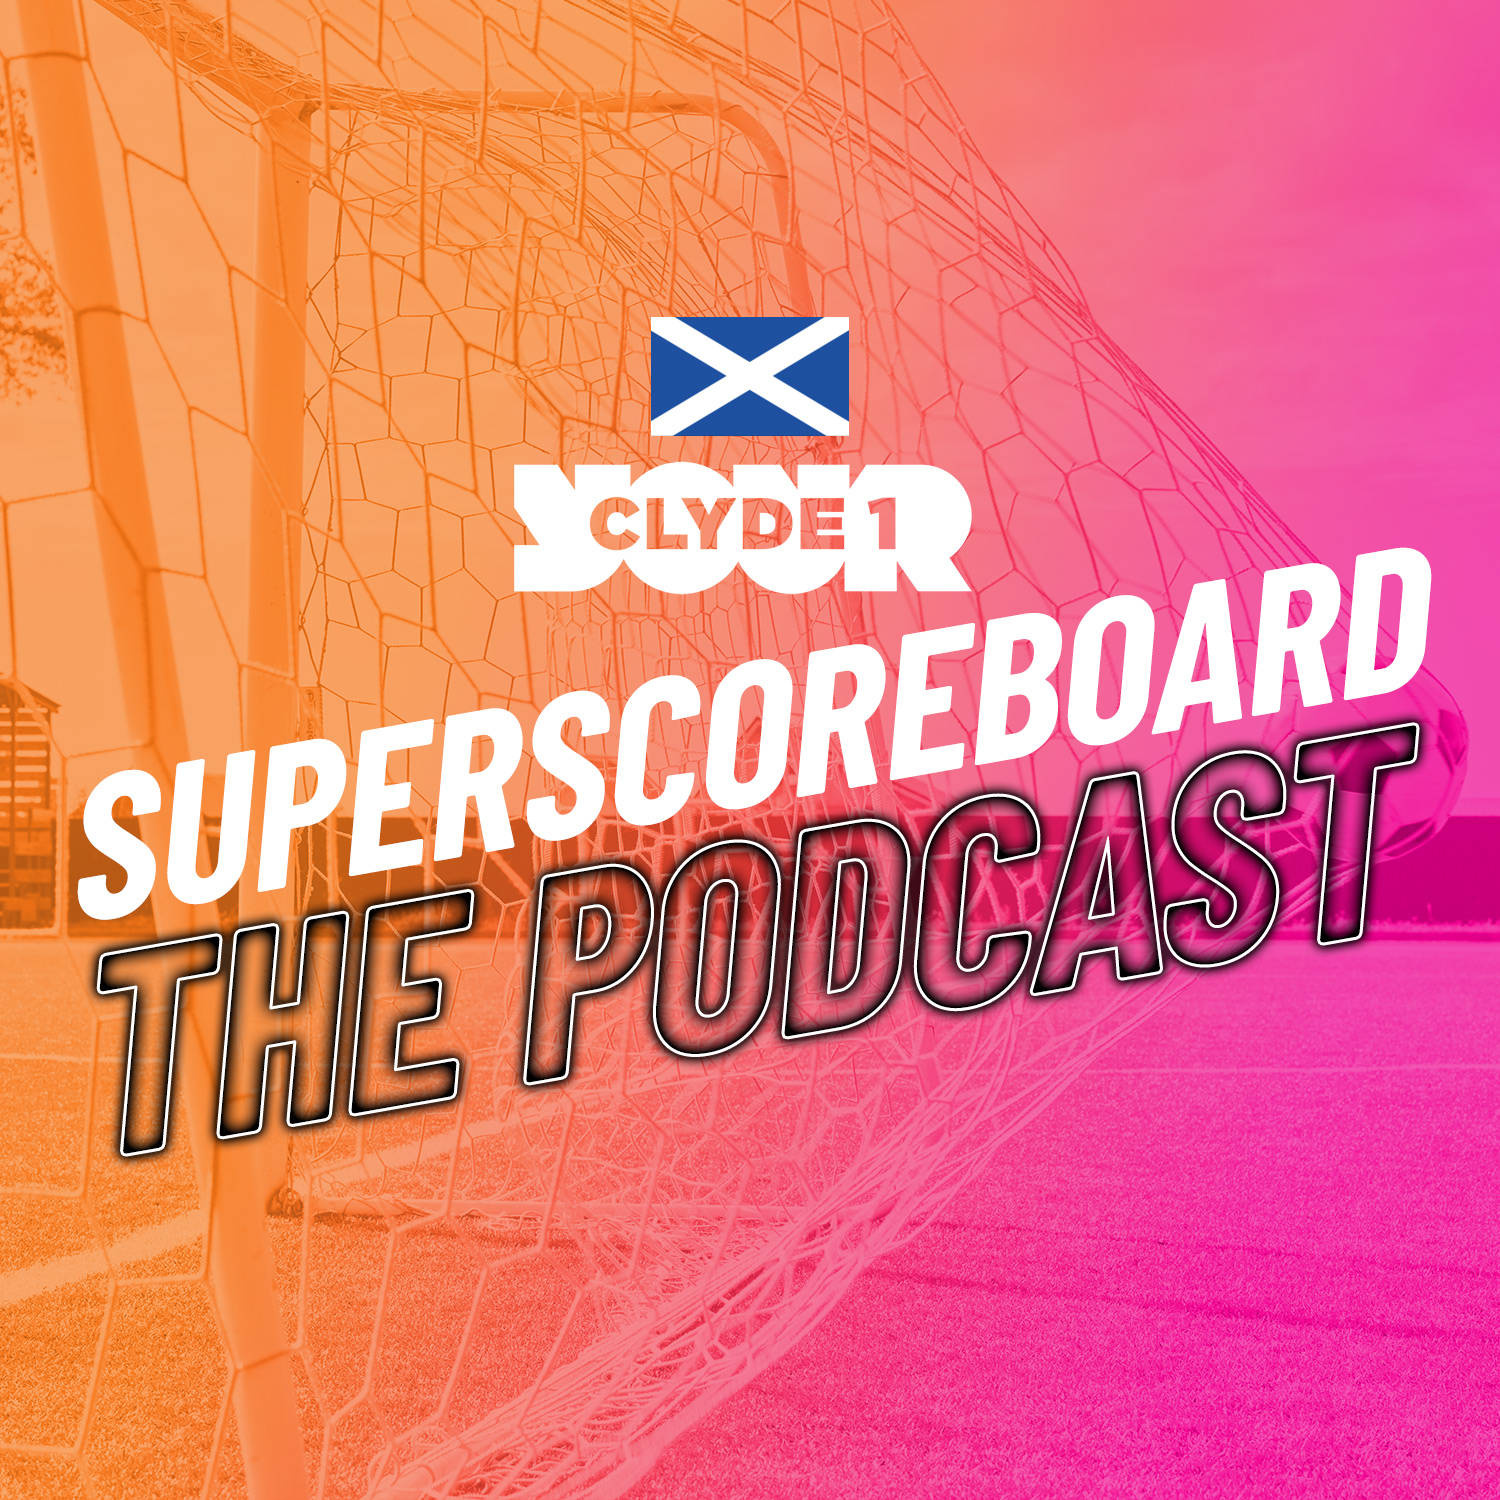 Saturday 27th January Clyde 1 Superscoreboard